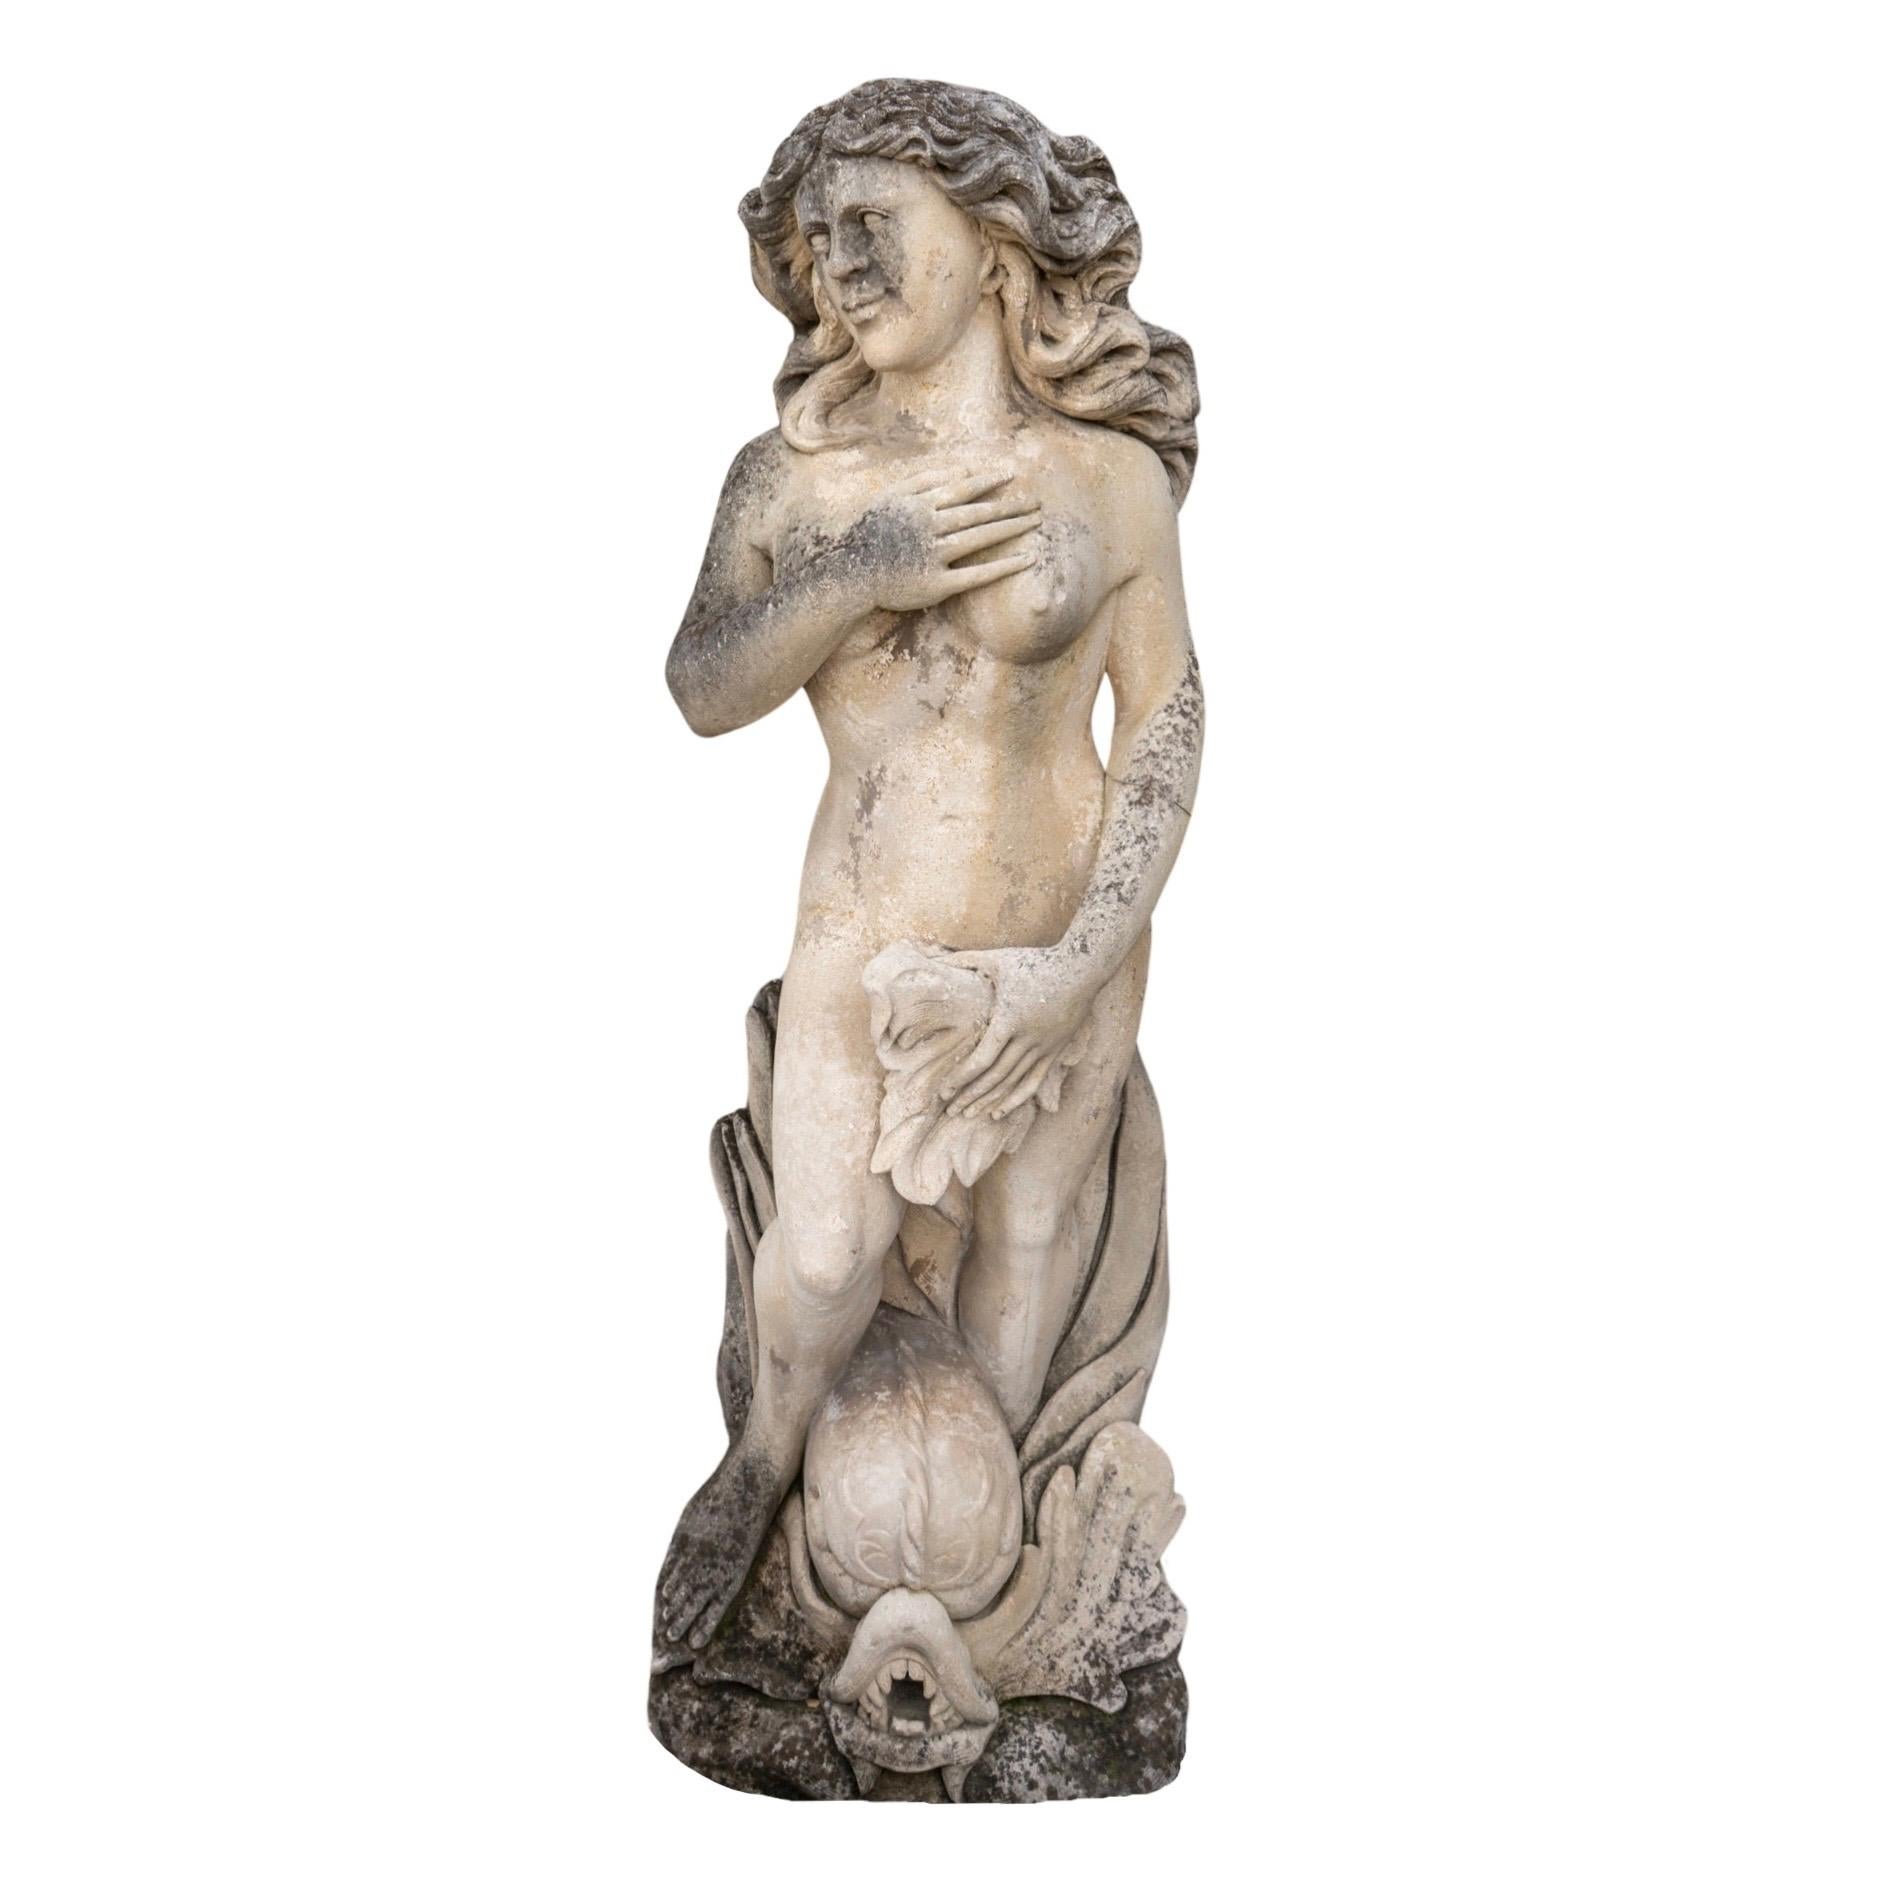 This Italian Limestone Venus Sculpture is a stunning depiction of the goddess of love, carved with incredible detail and from authentic 18th century limestone sourced from Italy. The intricately carved mythical fish under the Venus sculpture's legs